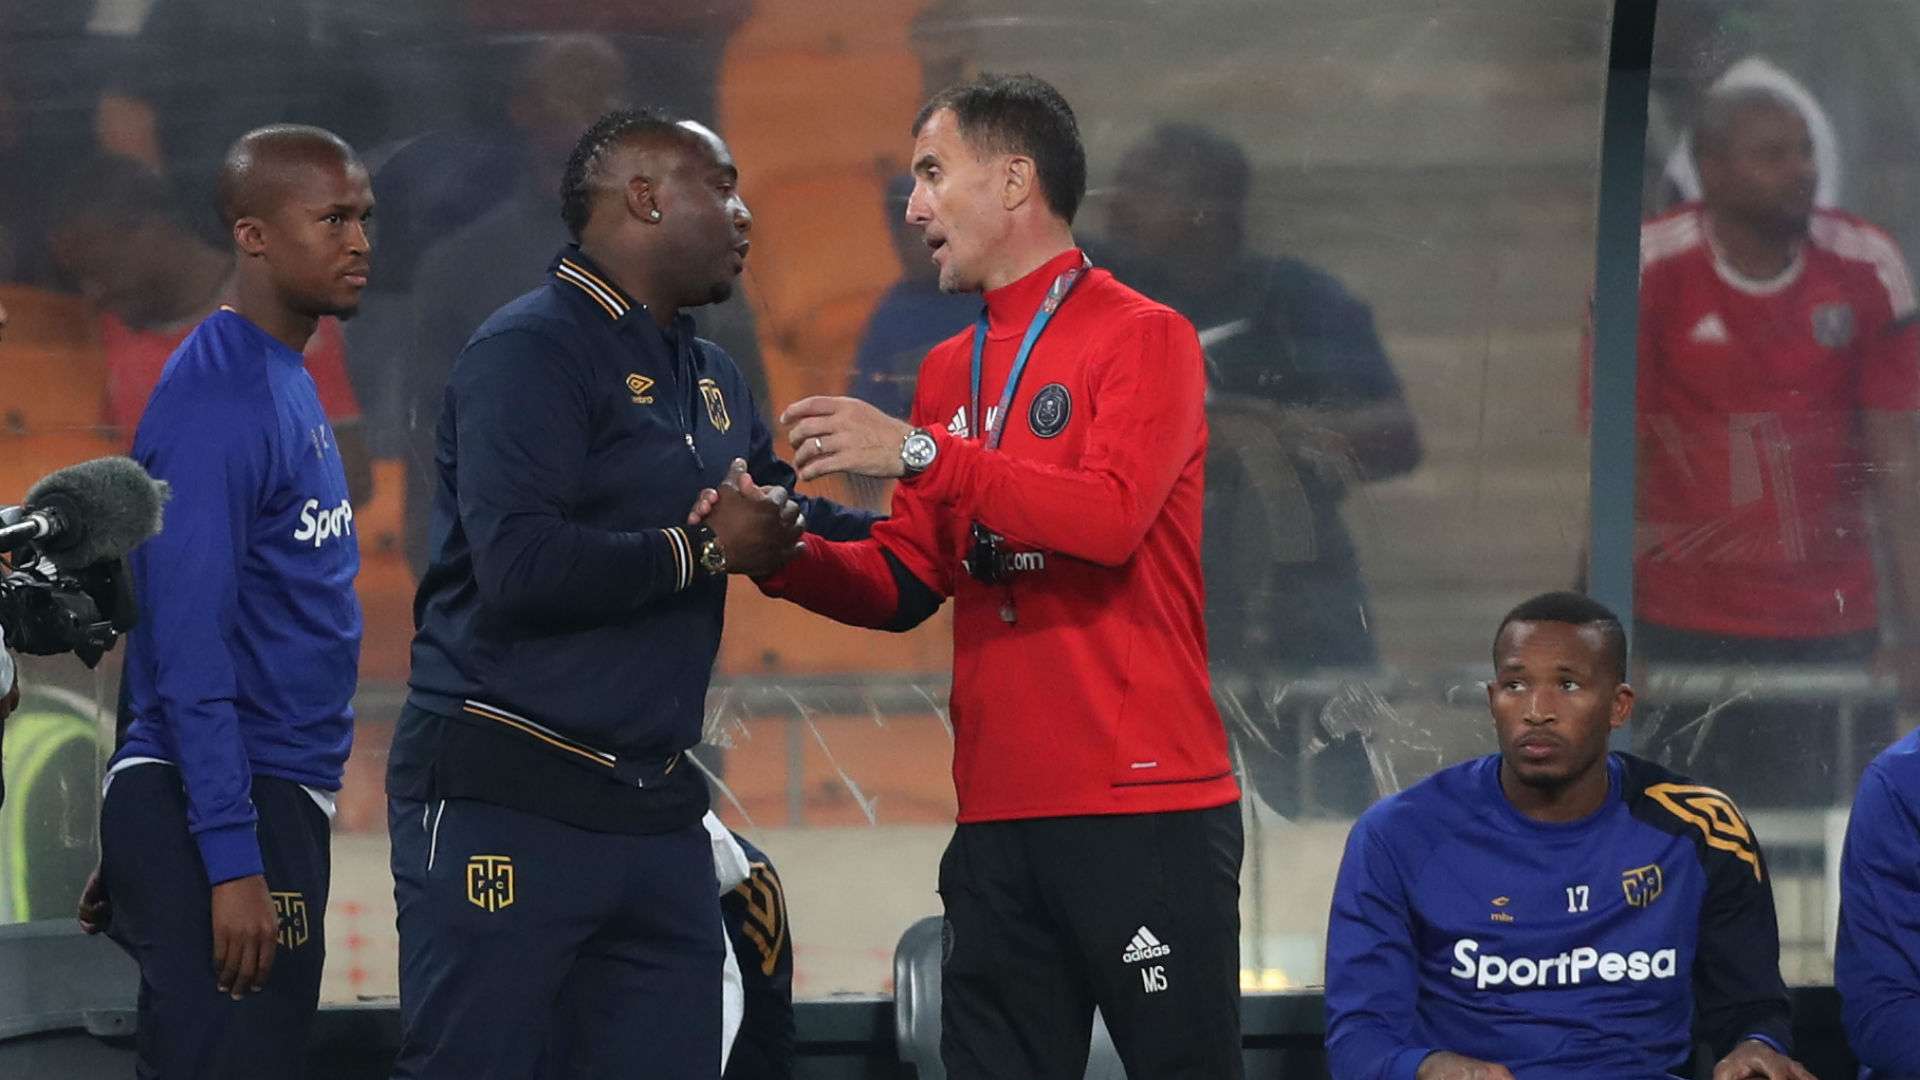 Cape Town City coach Benni McCarthy with Orlando Pirates mentor Milutin Sredojevic, while Tshepo Gumede & Lehlohonolo Majoro look on.